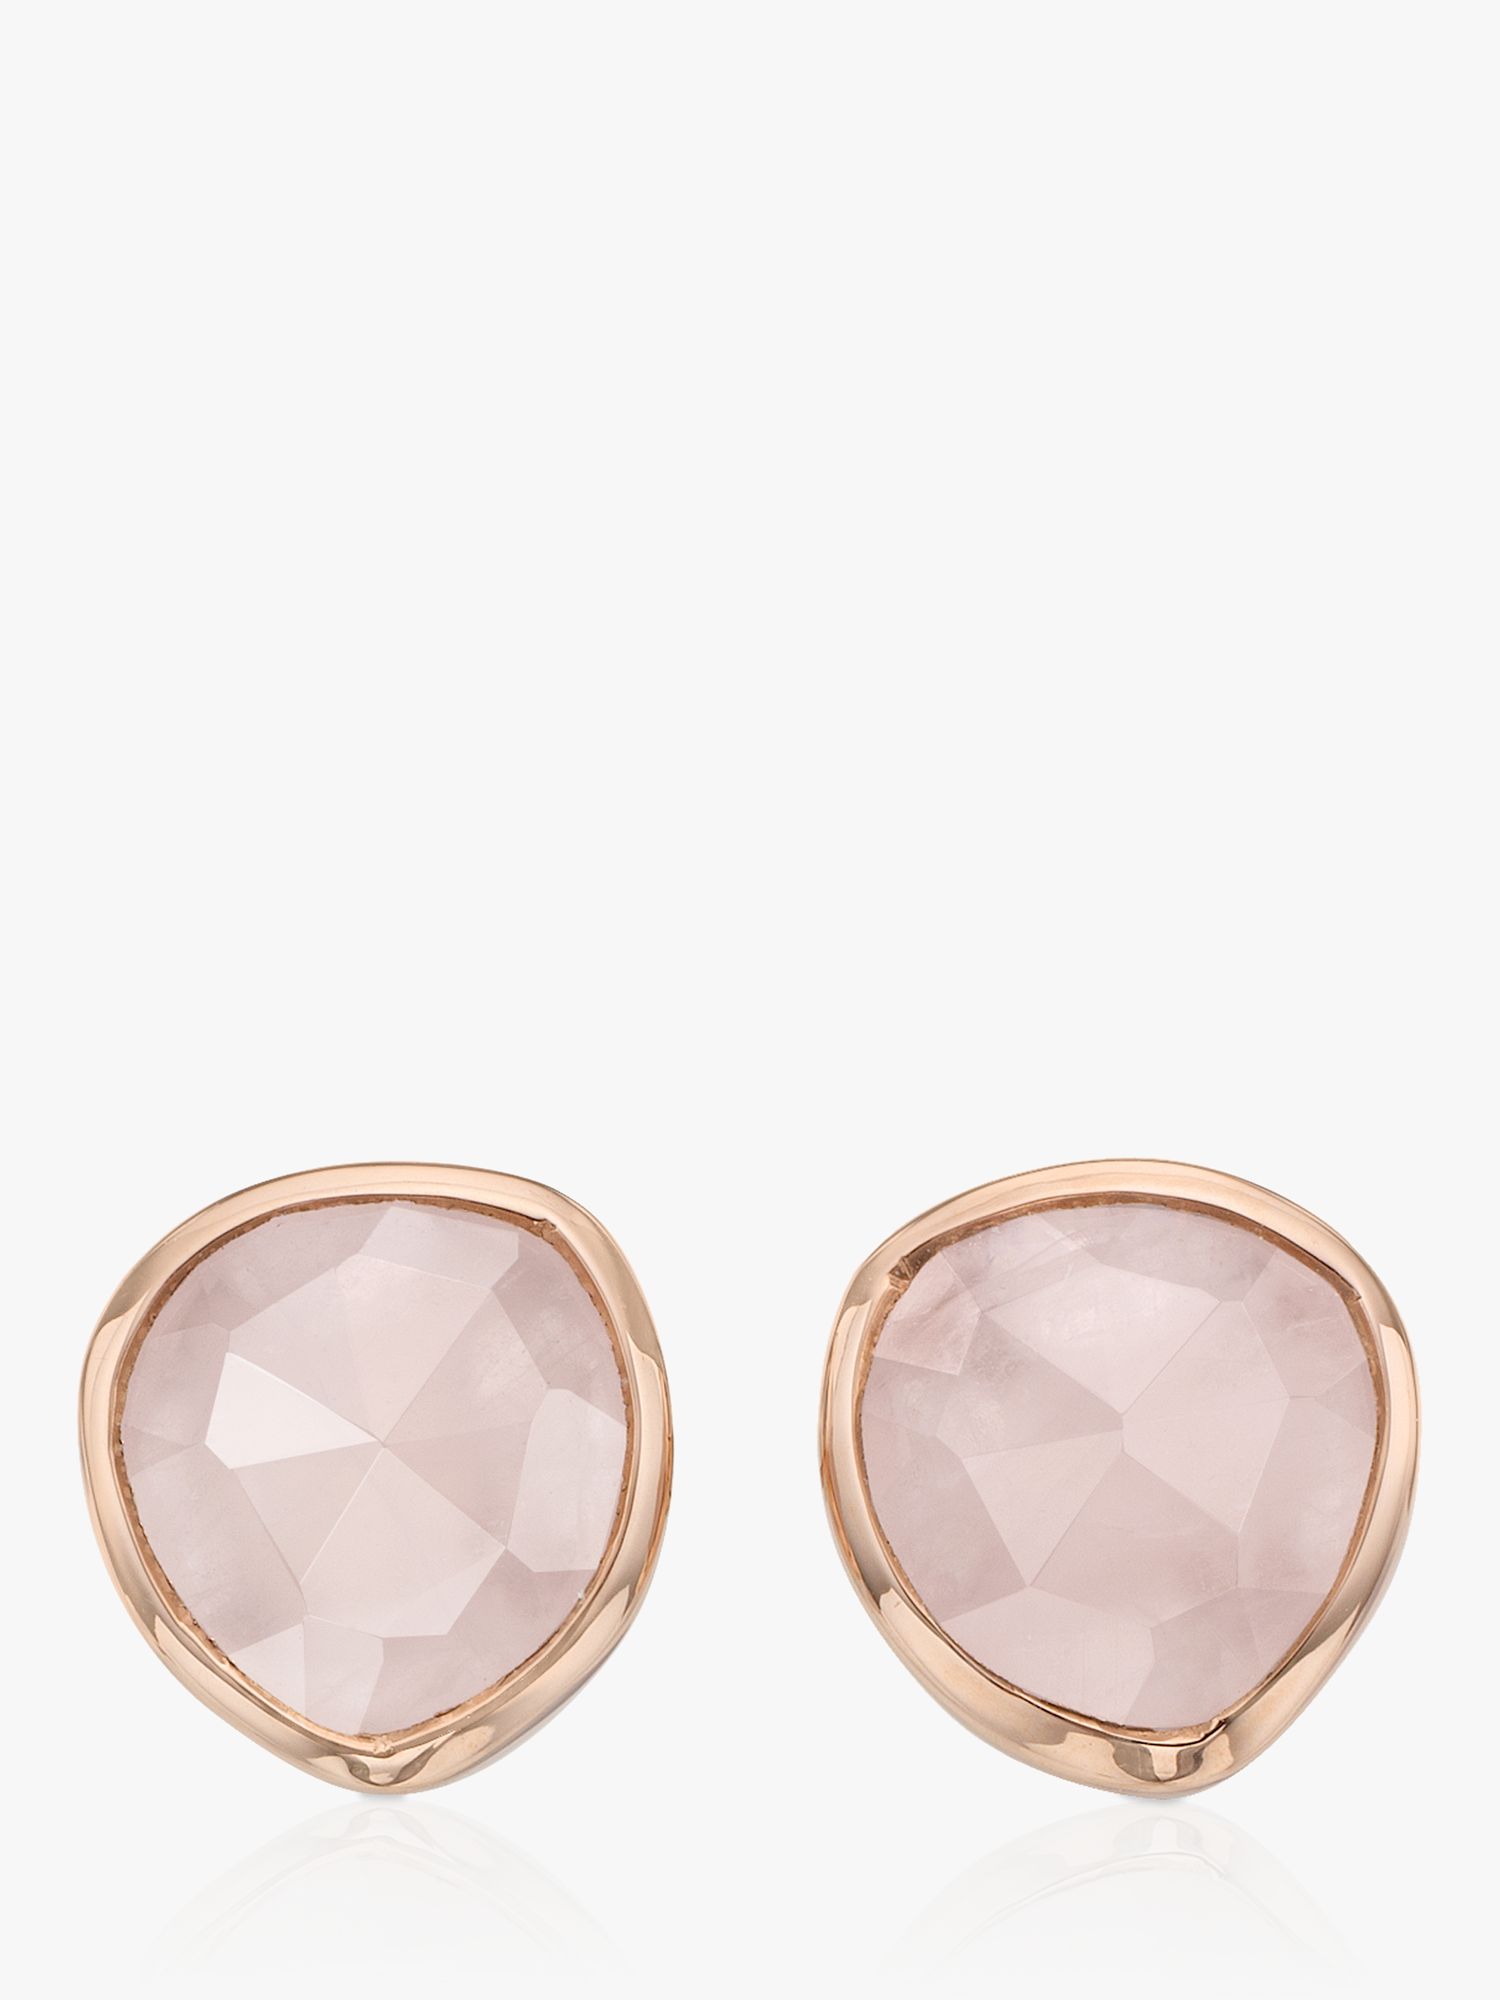 27 Stud Statement Earrings - Cool Rose Gold and Silver Stud